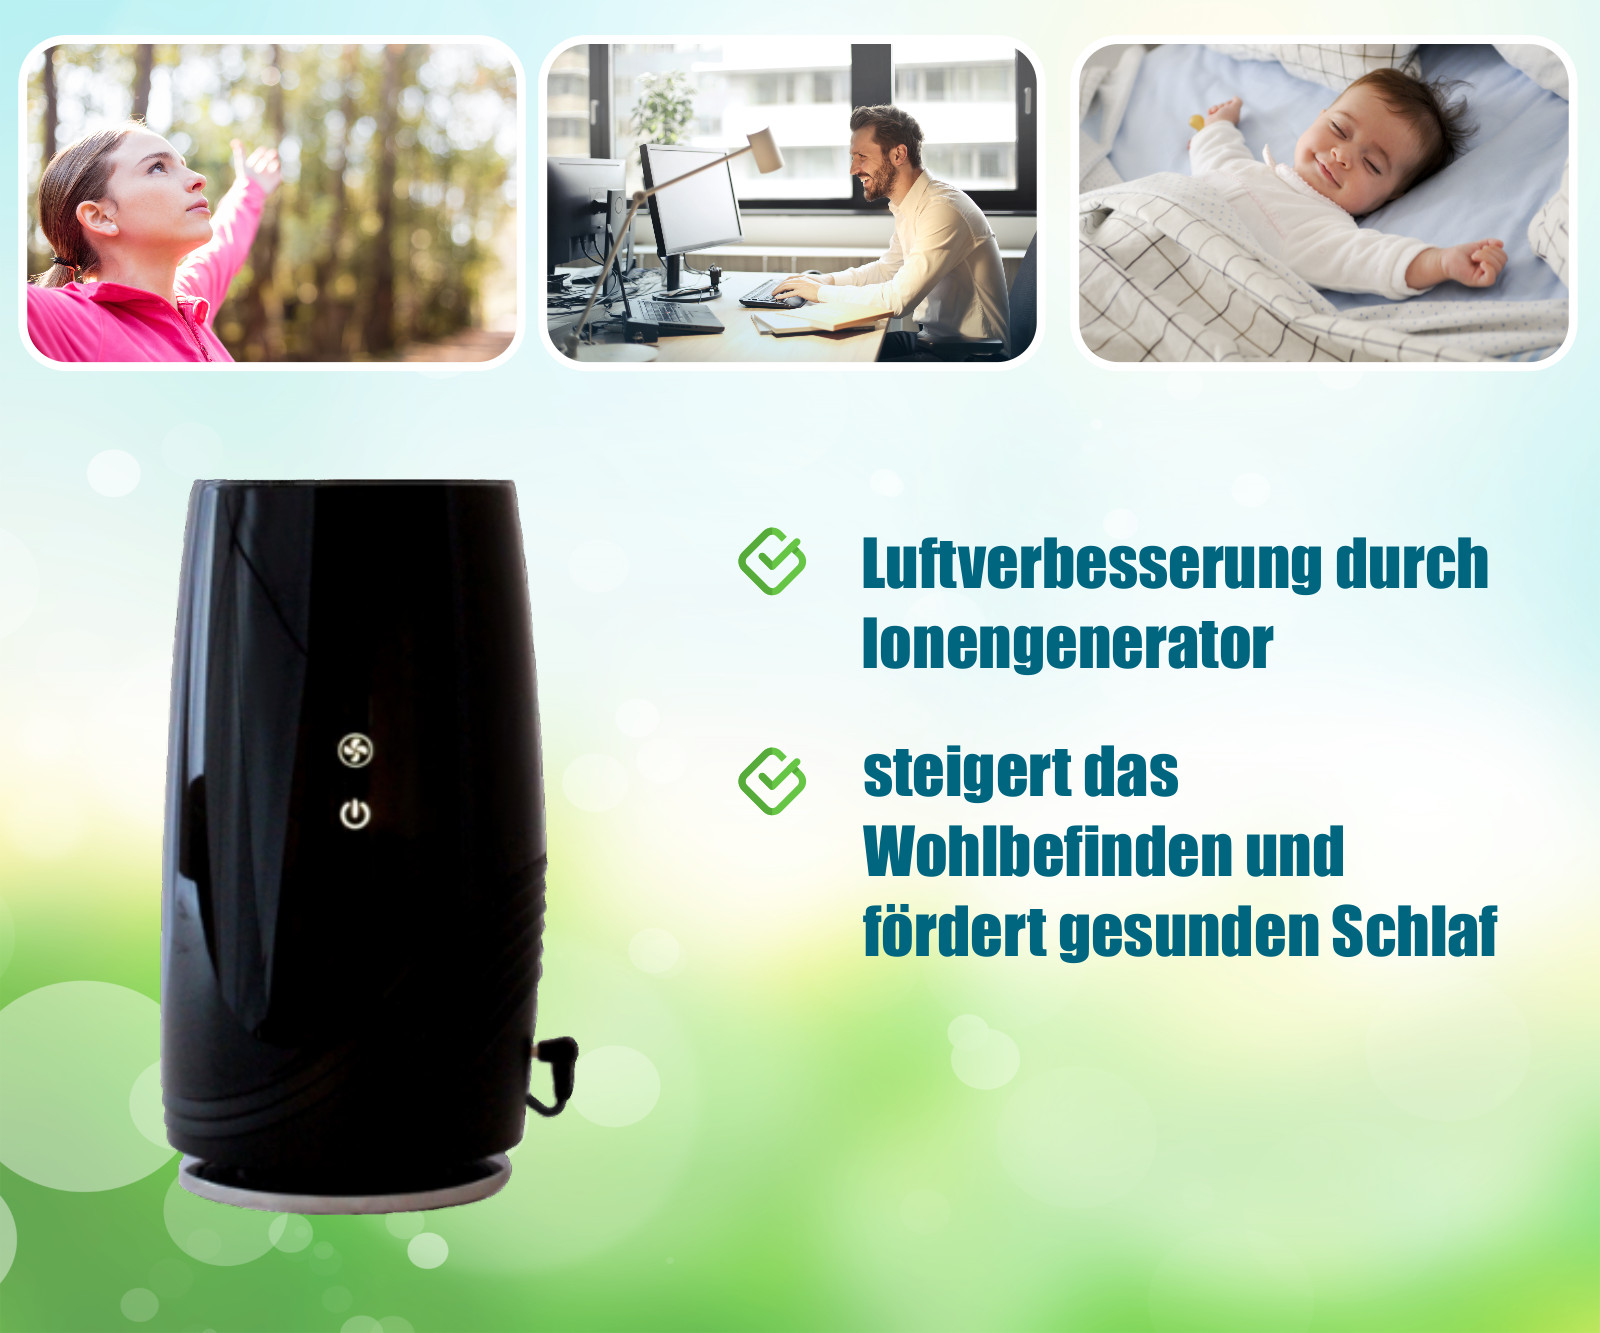 Desktop air purifier with USB power supply